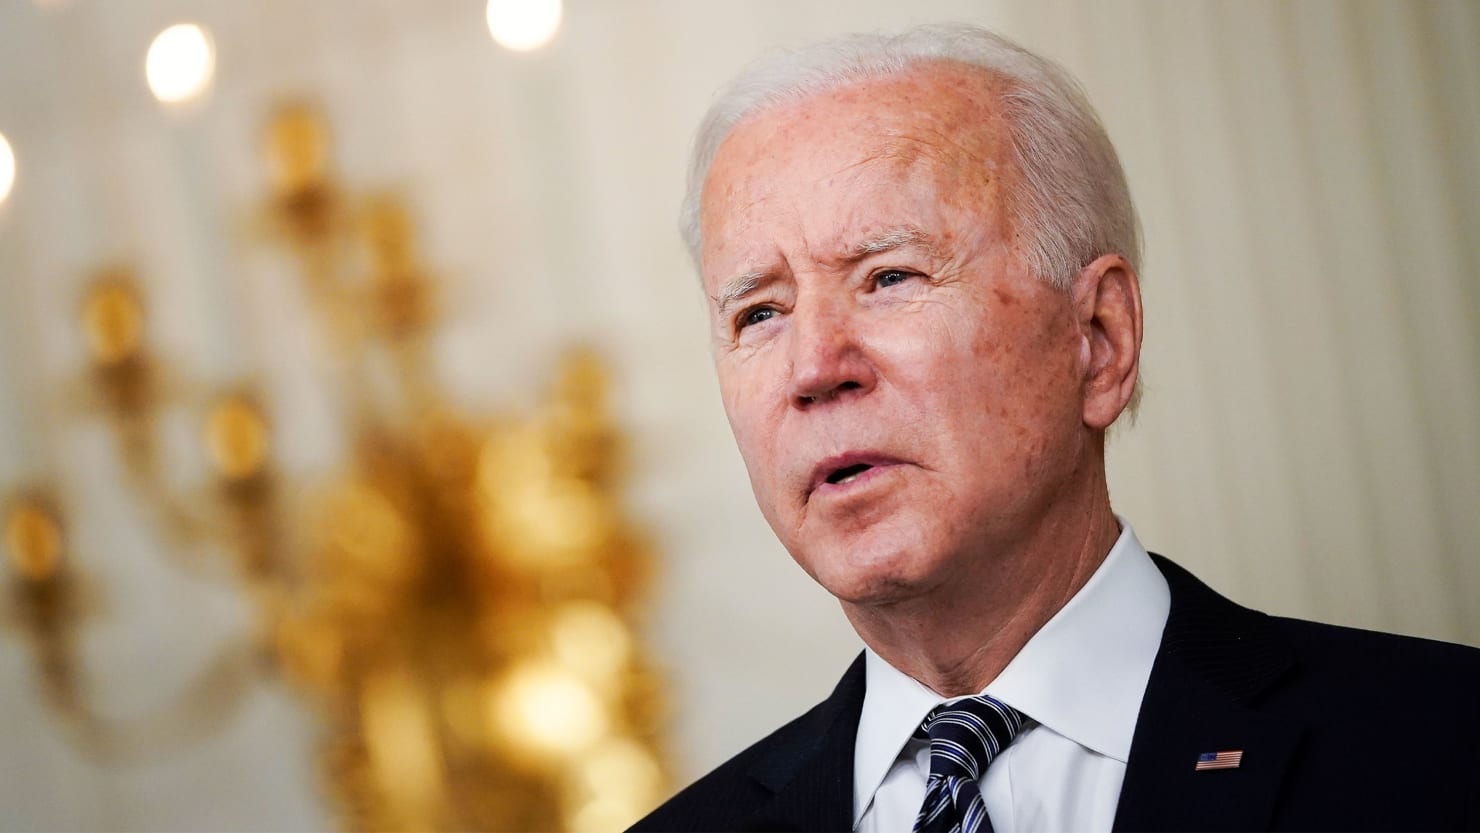 Does anyone care if Biden gives a formal press conference?